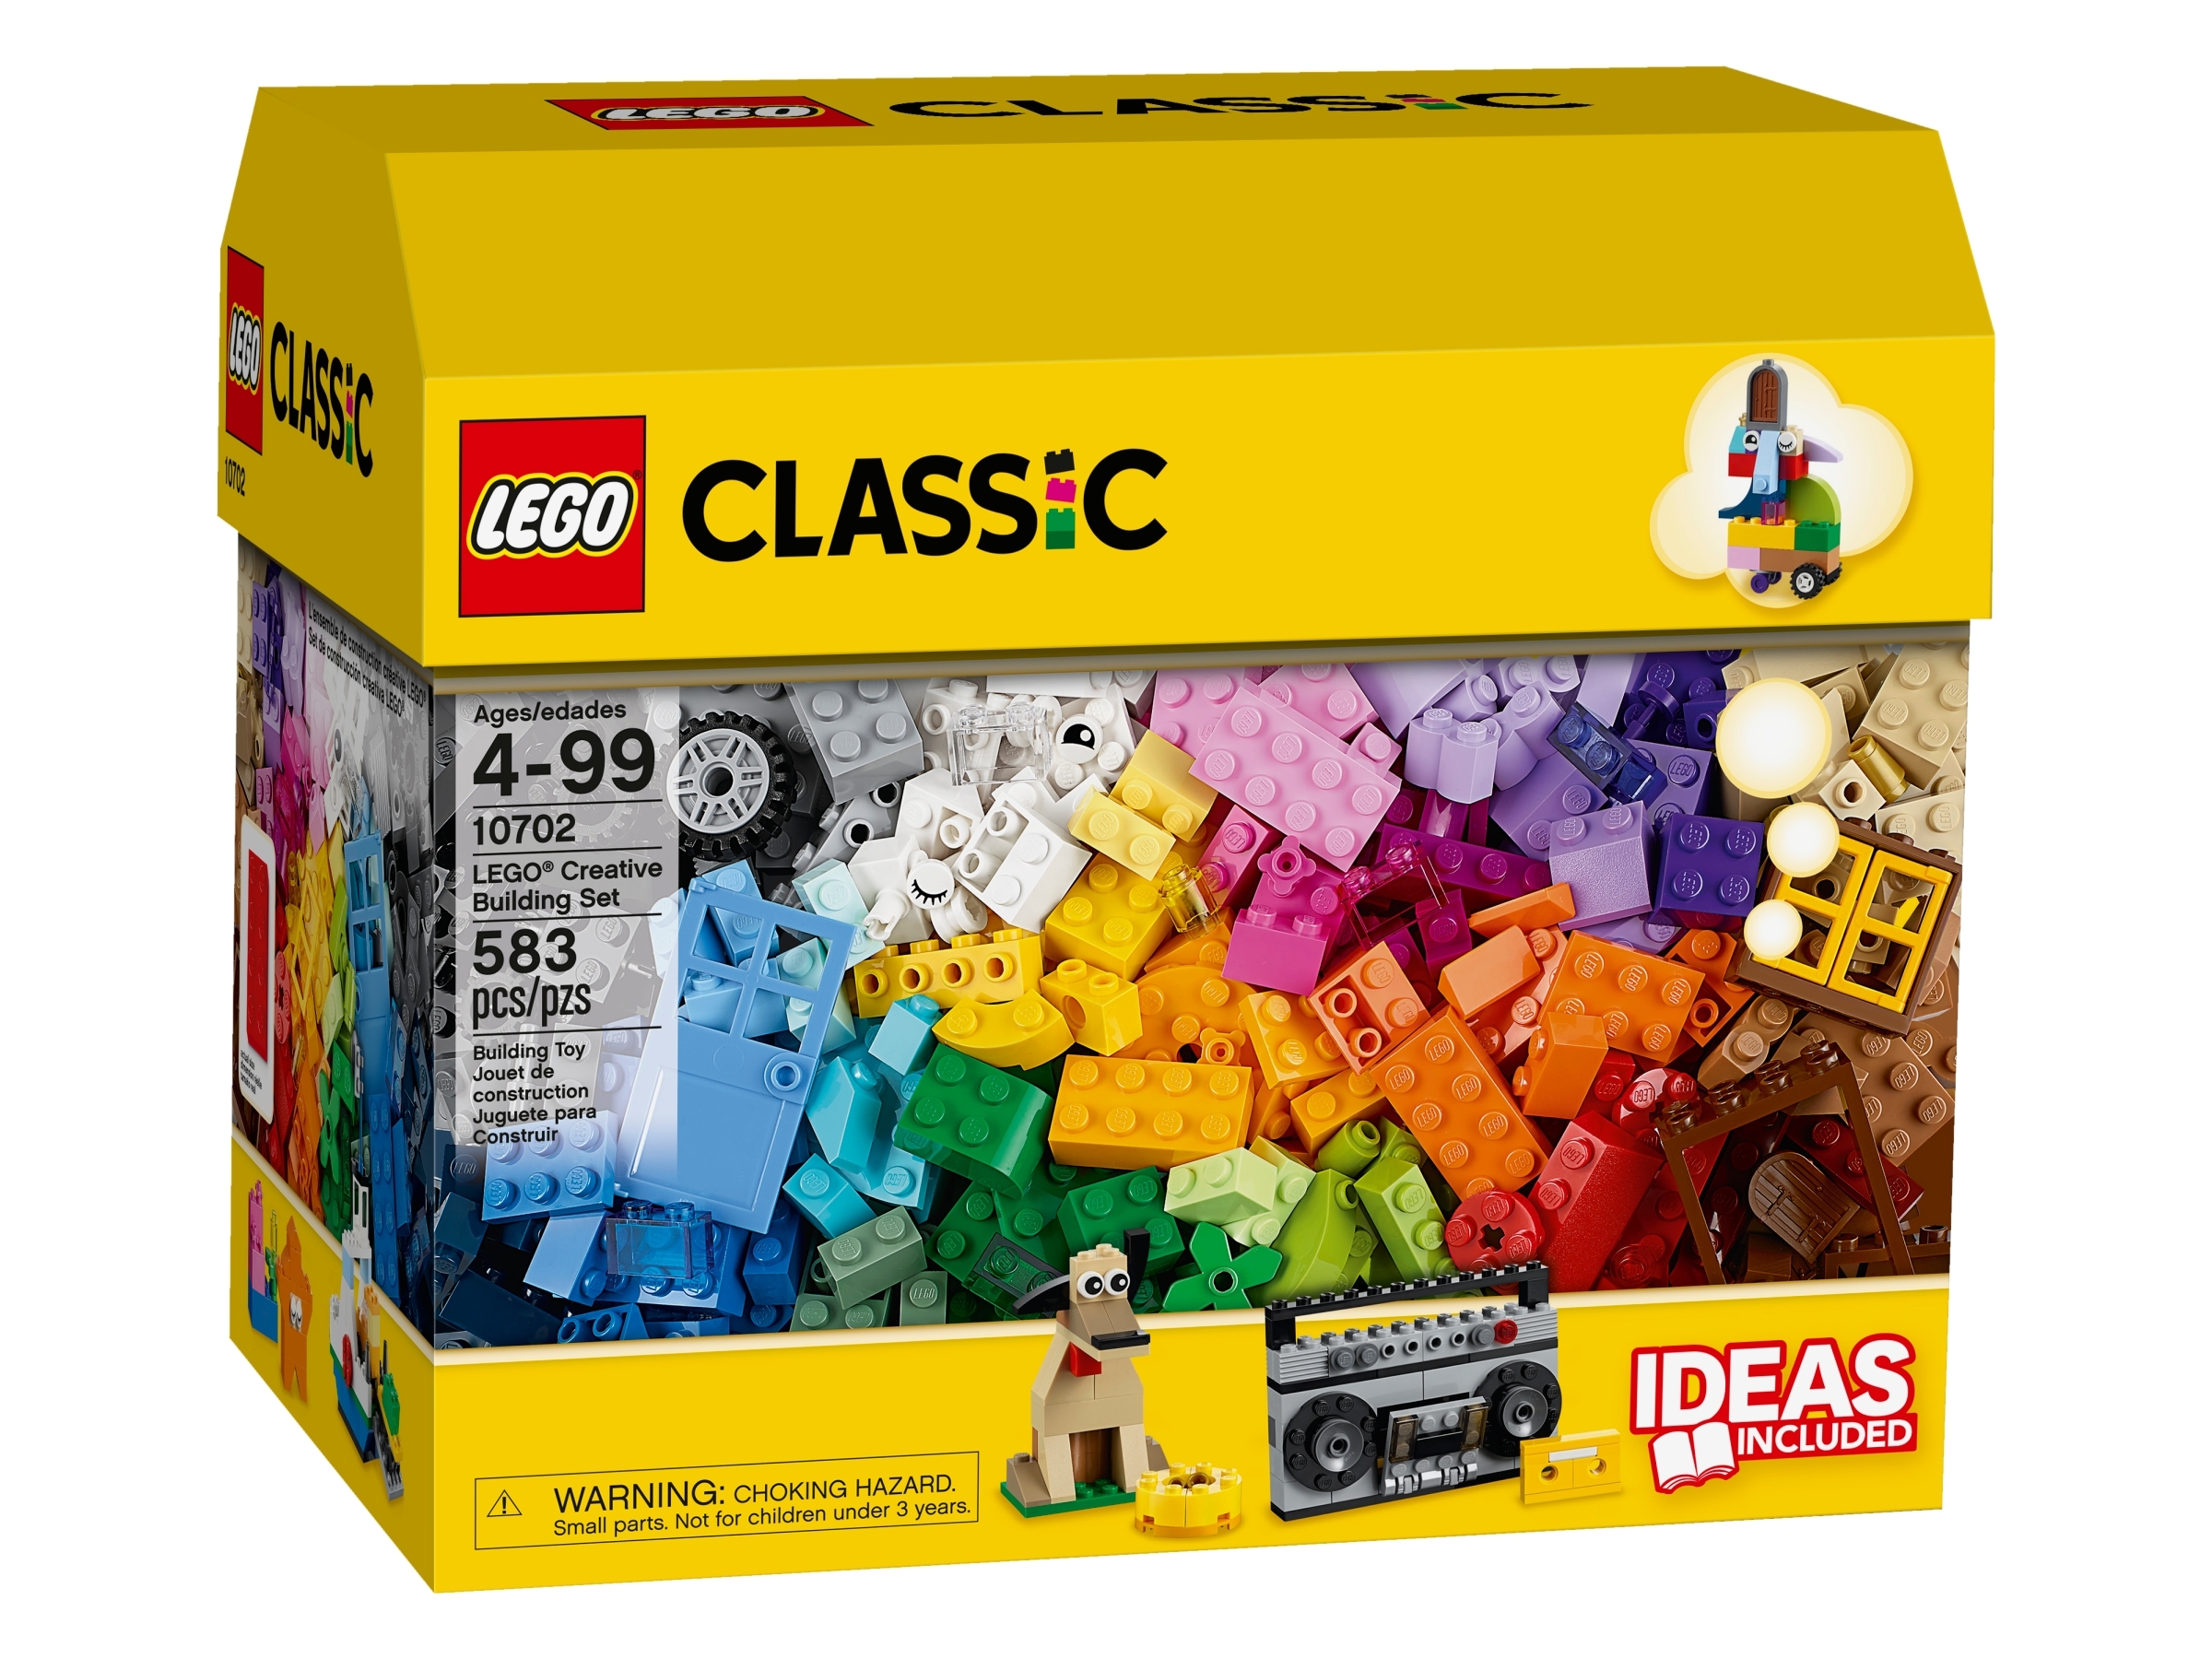 LEGO® Creative Building Set 10702 Classic online at the Official LEGO® Shop US